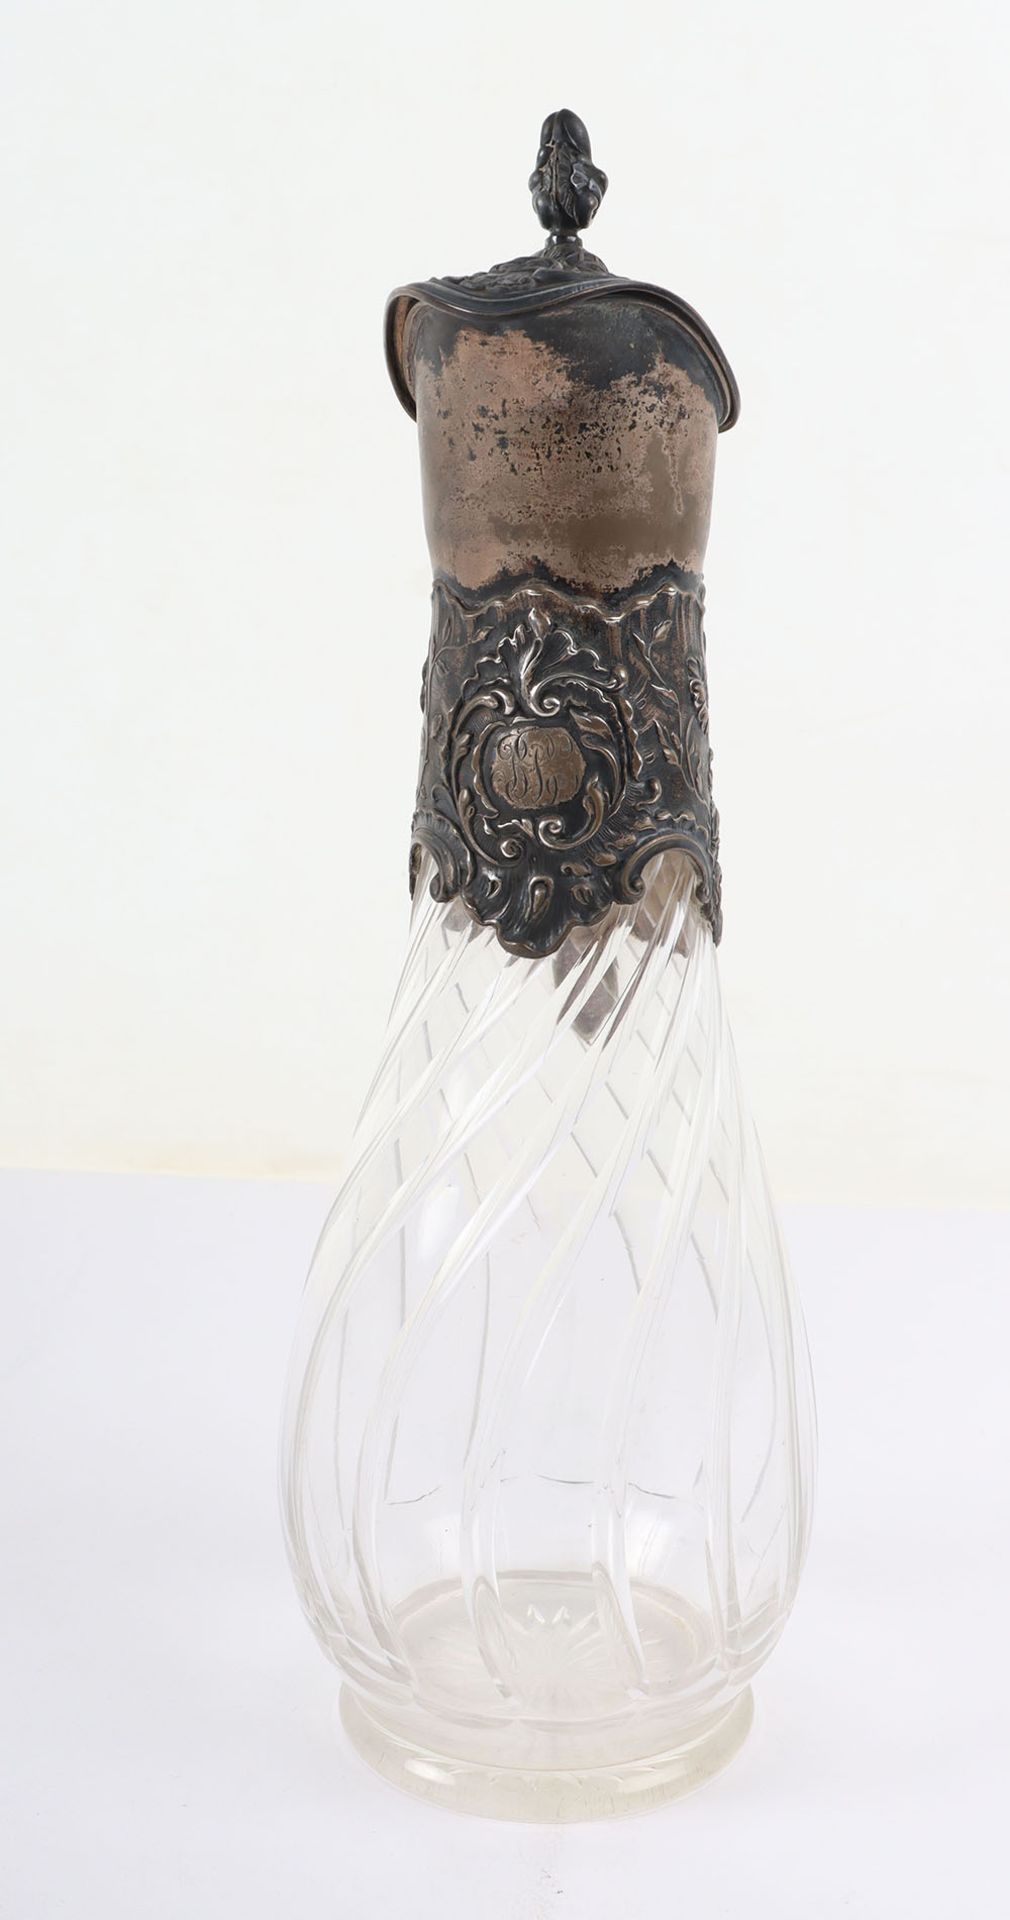 A German silver and glass claret jug - Image 3 of 10